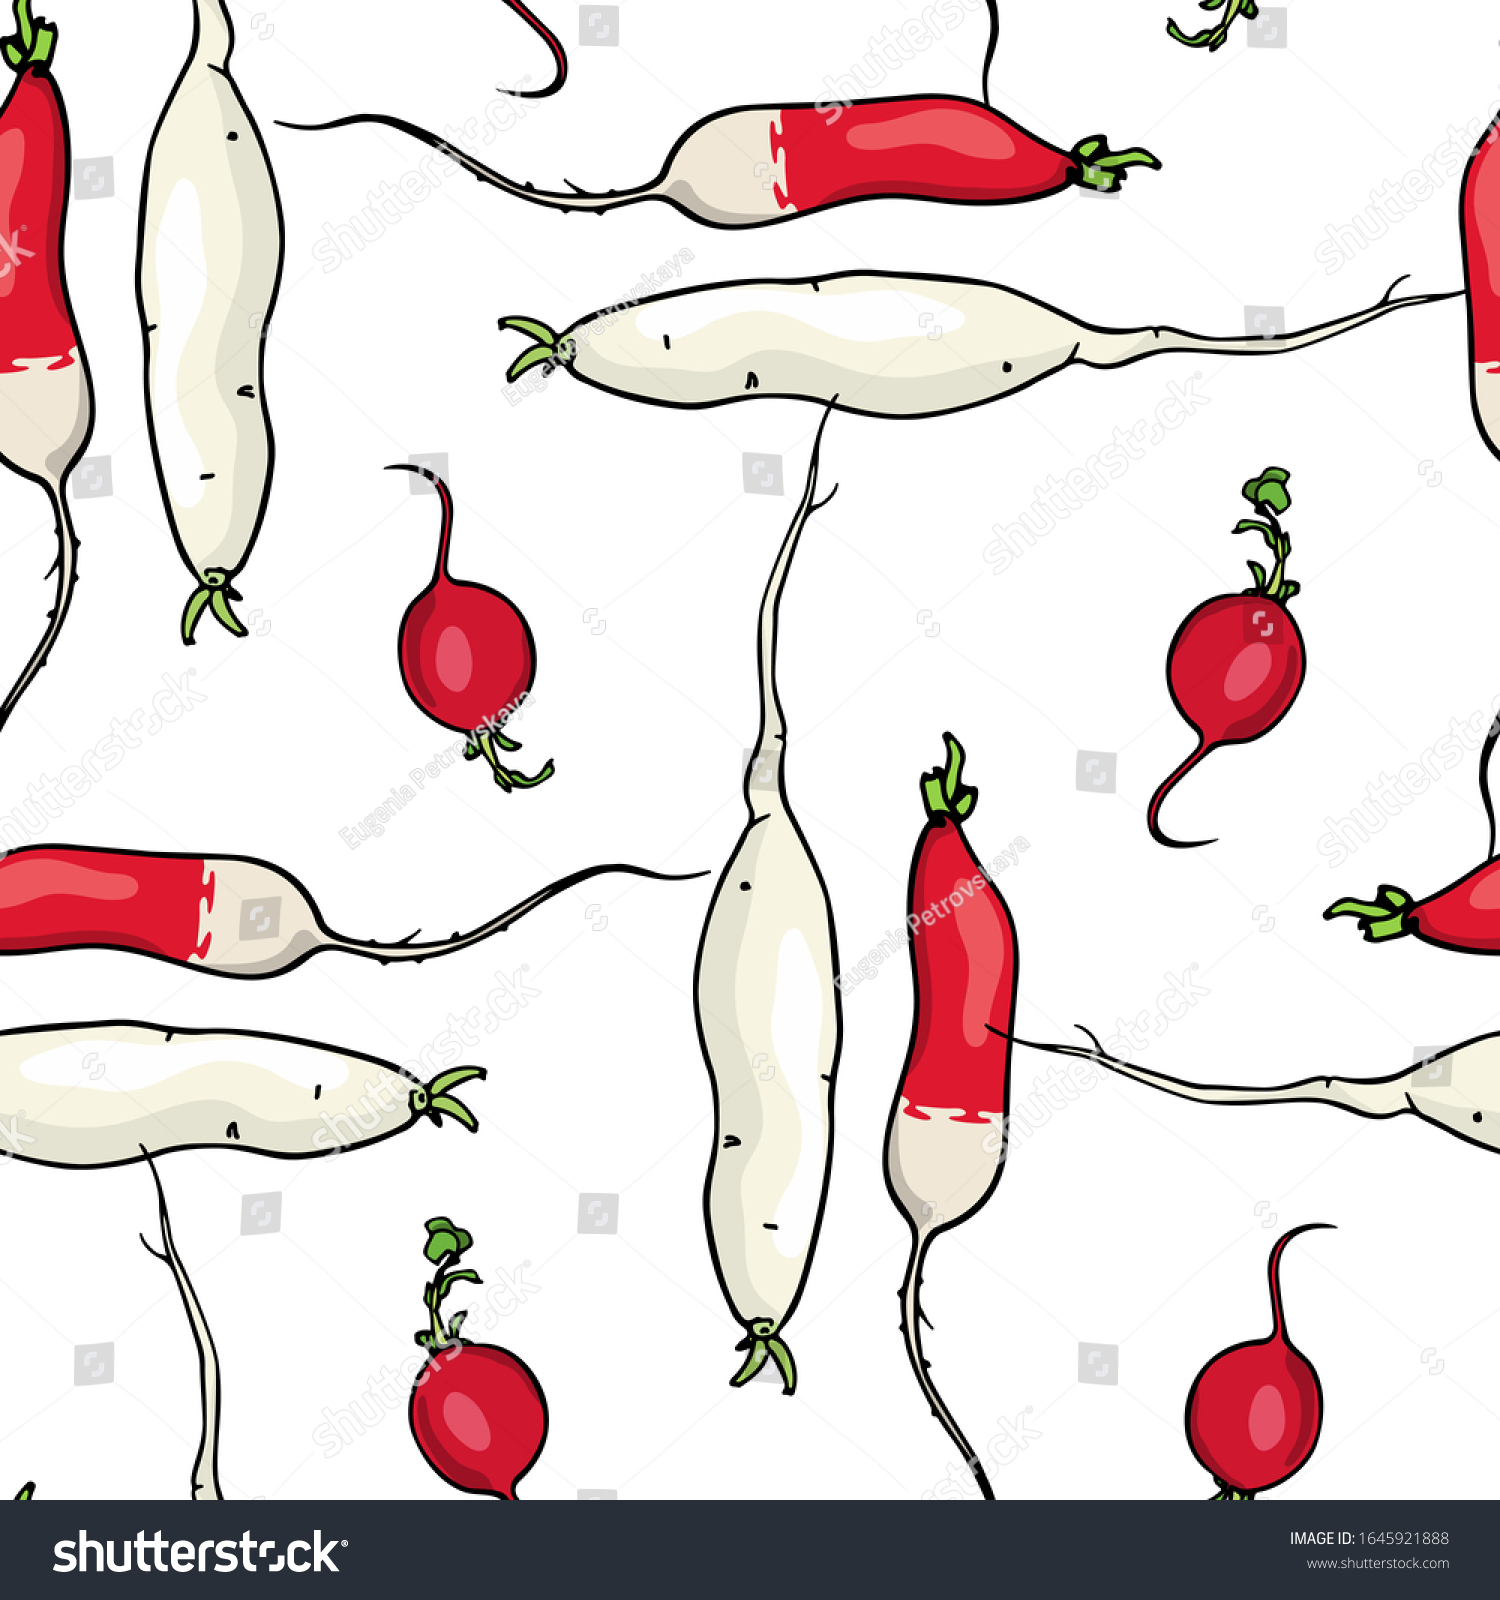 Vector seamless pattern with hand drawn French breakfast and White Icicle radish. Beautiful food design elements, ink drawing. Perfect for prints and patterns #1645921888